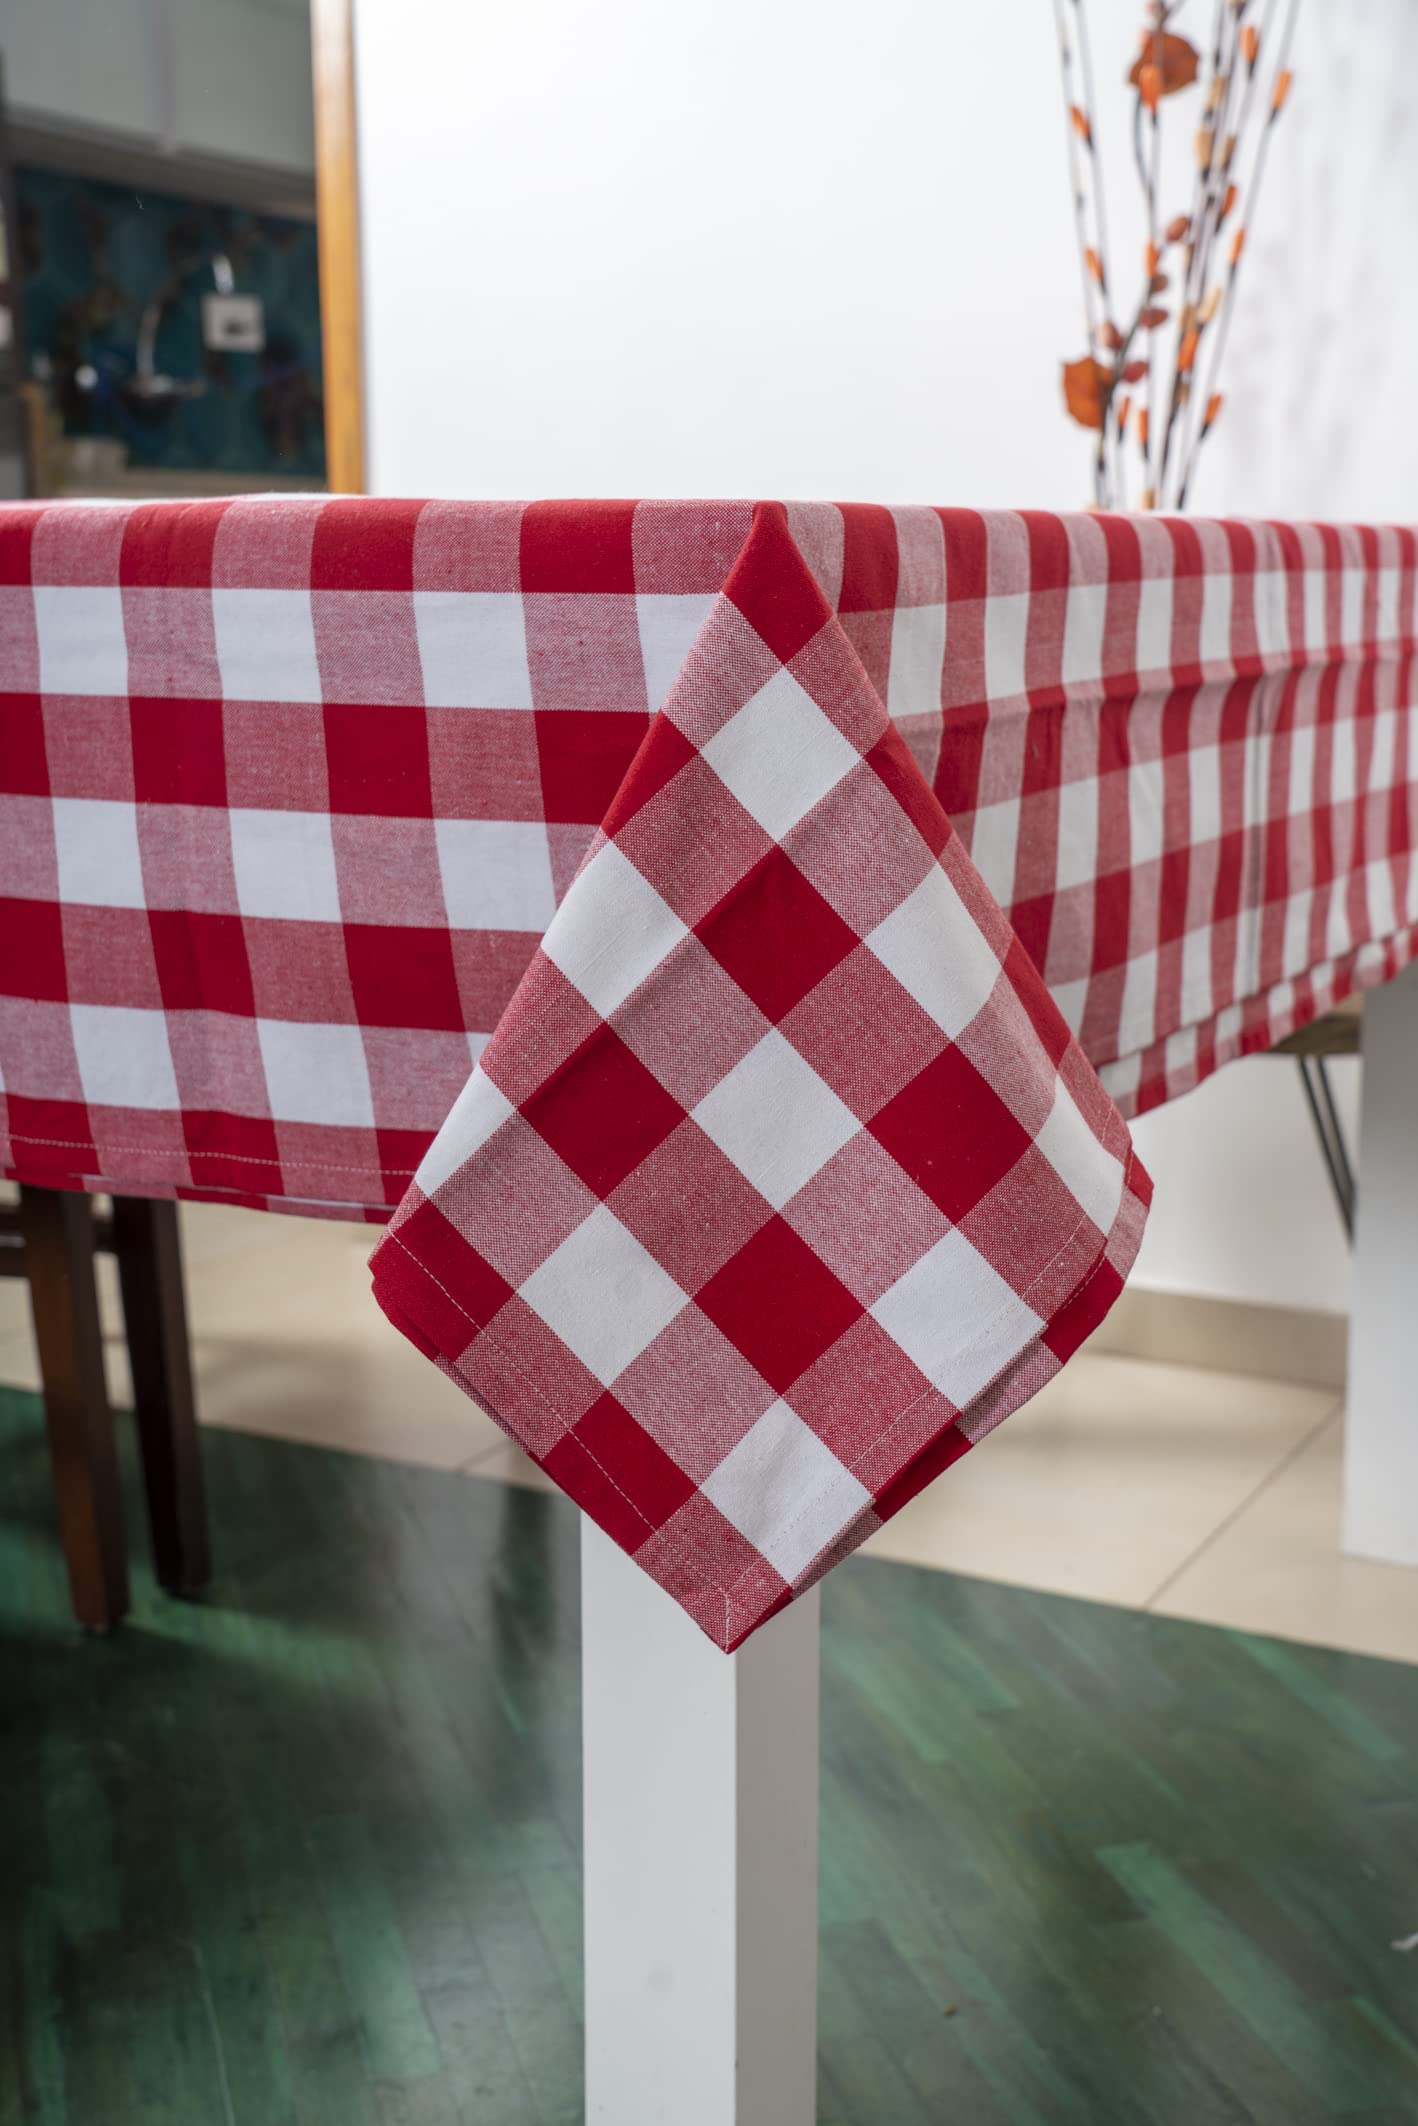 Amazon Brand – Umi 100% Cotton Table Cloth - 150 x 225 cm Checkered Rectangle Table Cover for Kitchen Dining - Washable Tablecloth for Home, Restaurant, Parties (Red & White, Pack of 1)